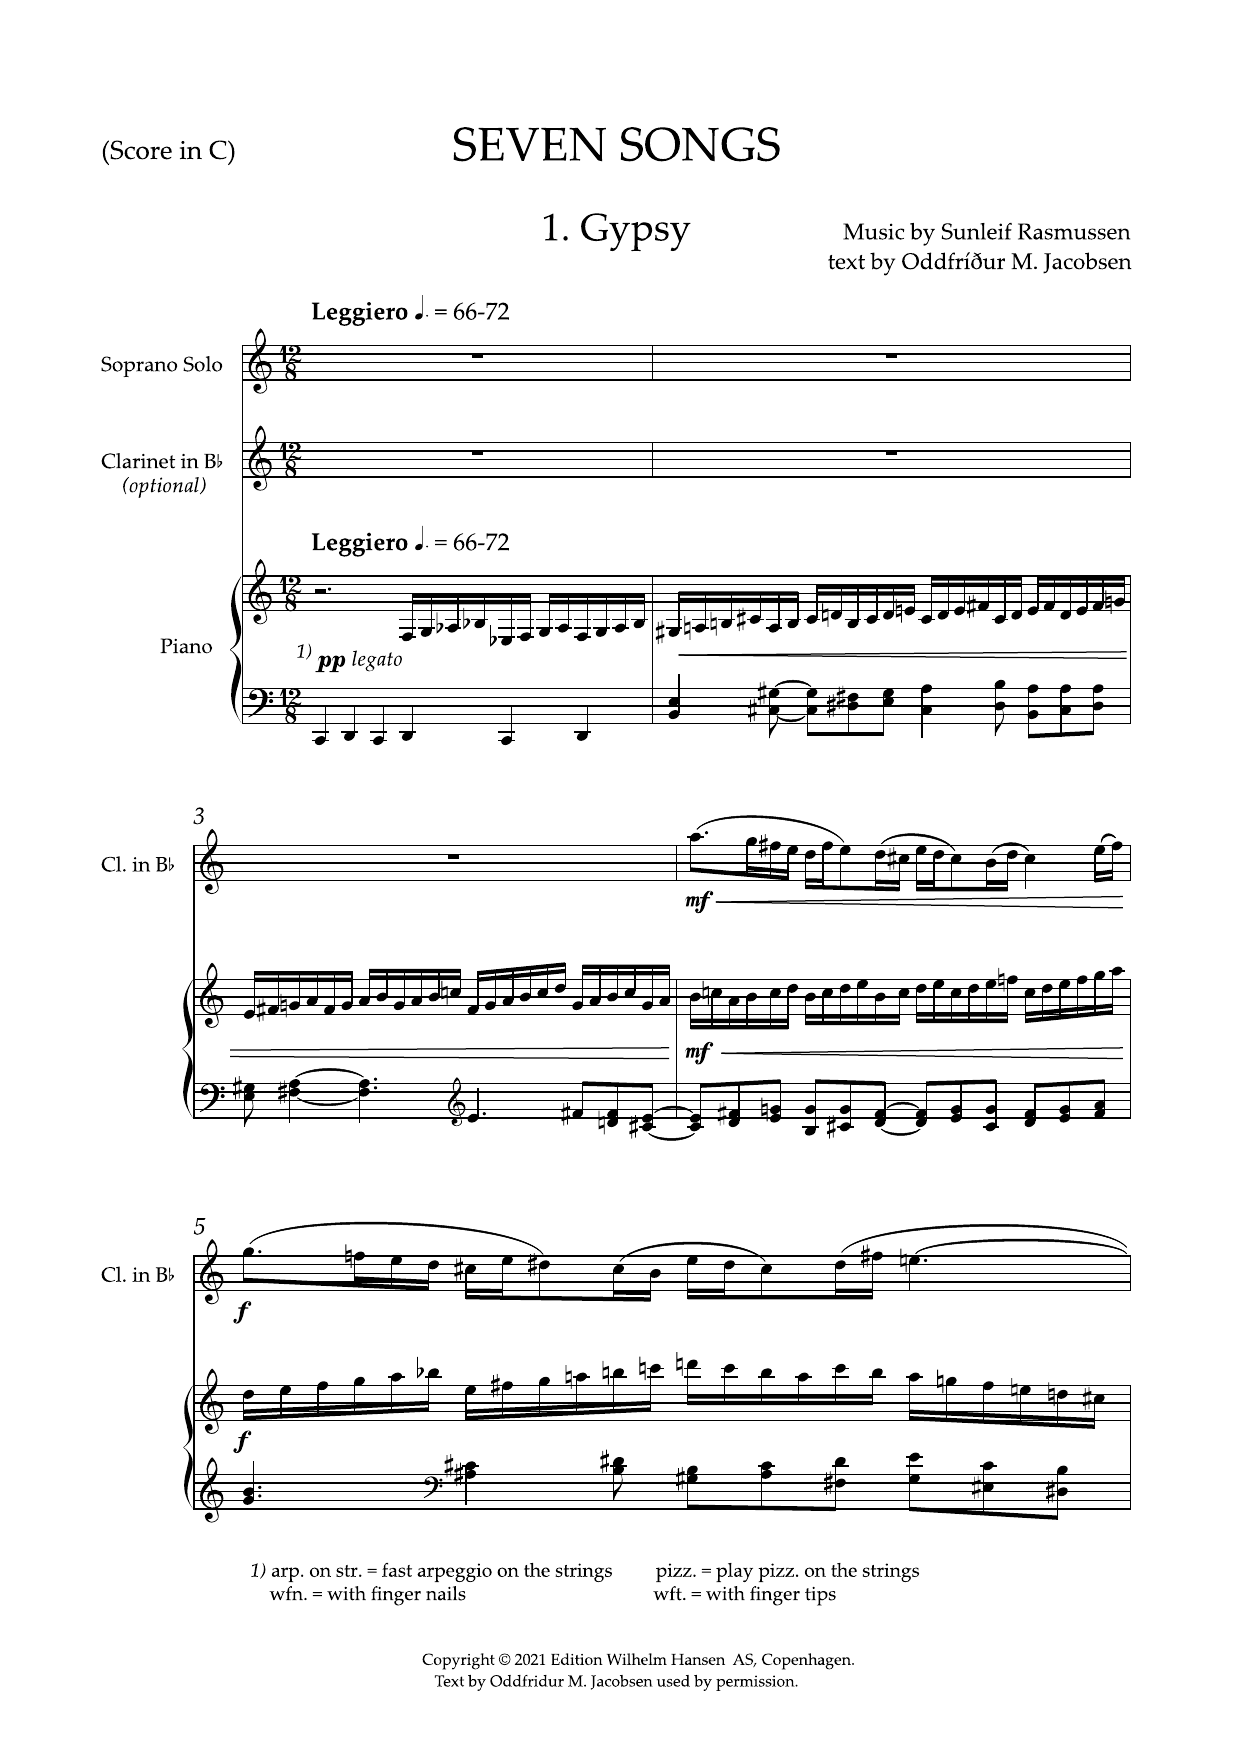 Sunleif Rasmussen 7 Sange Til Min Brors Digte (7 Songs for My Brother's Poems) sheet music notes printable PDF score